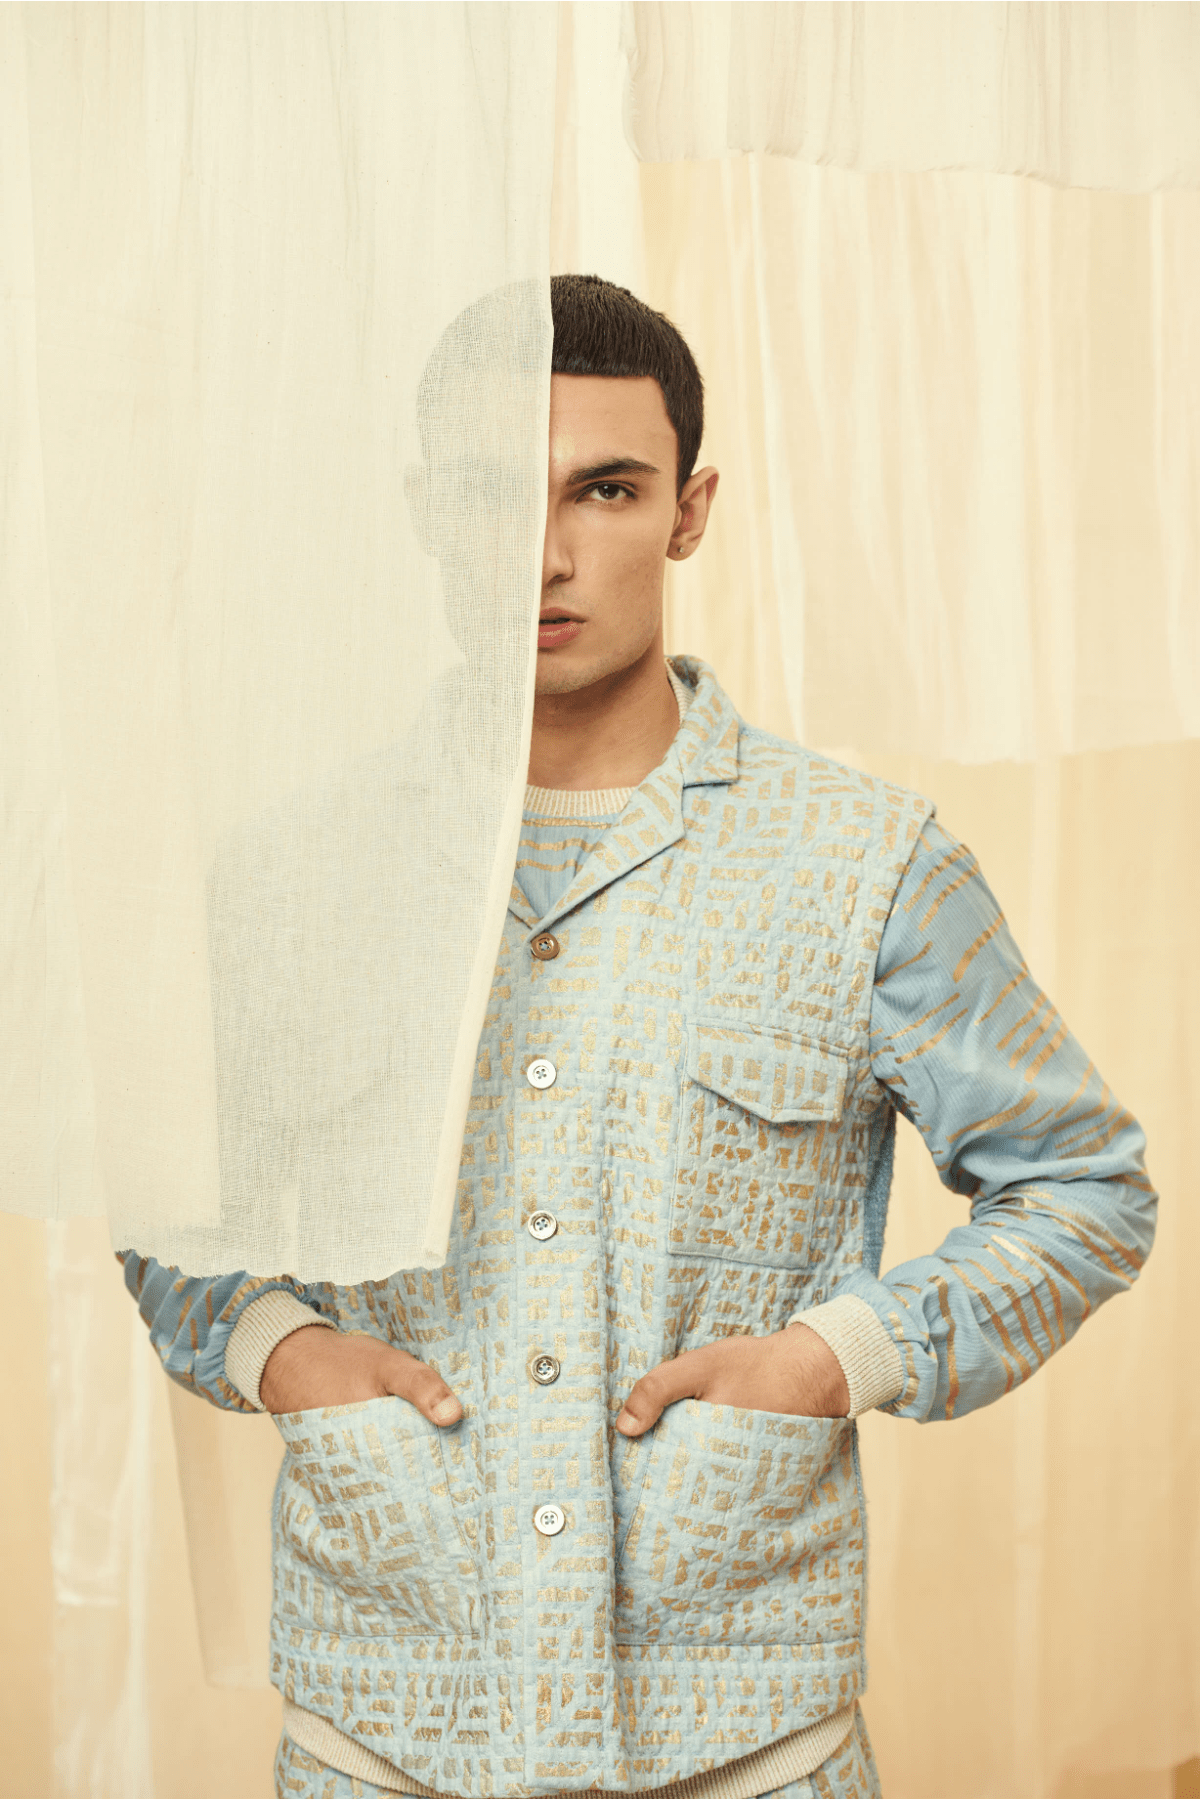 Blue Bandi Jacket with a Blue Poloneck and Blue Trousers - Kunal Anil Tanna